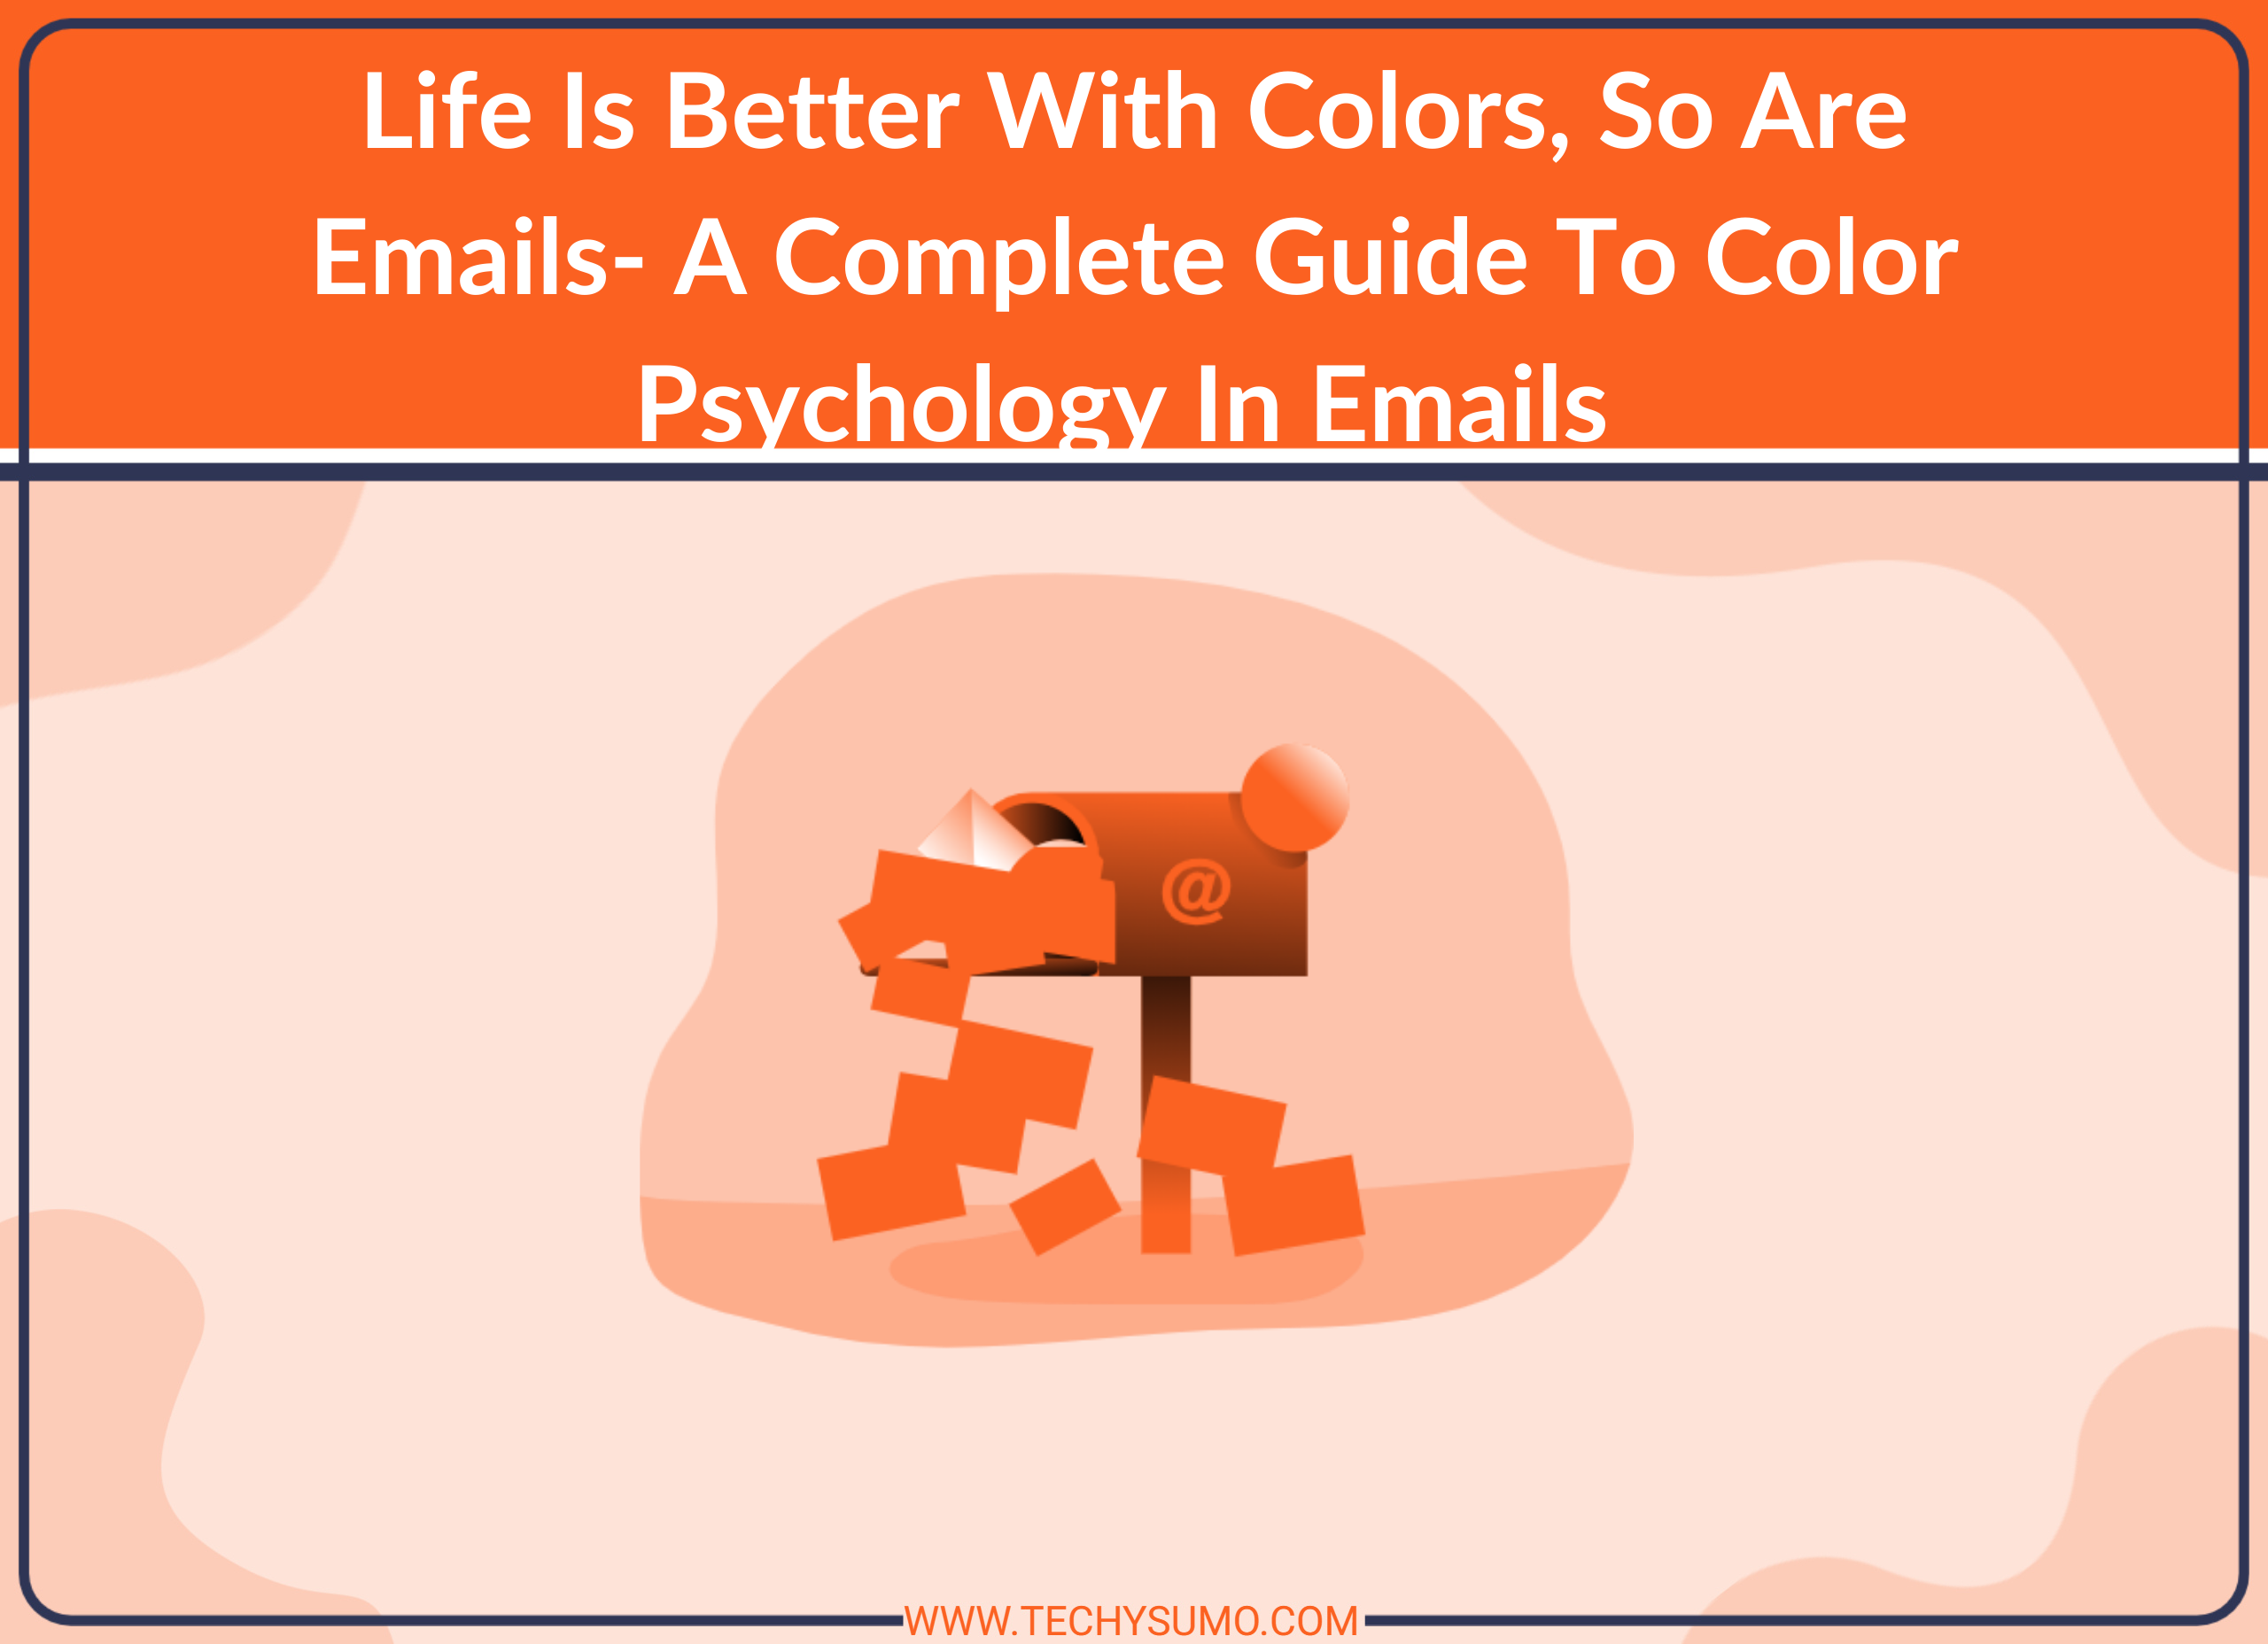 Life Is Better With Colors, So Are Emails- A Complete Guide To Color Psychology In Emails